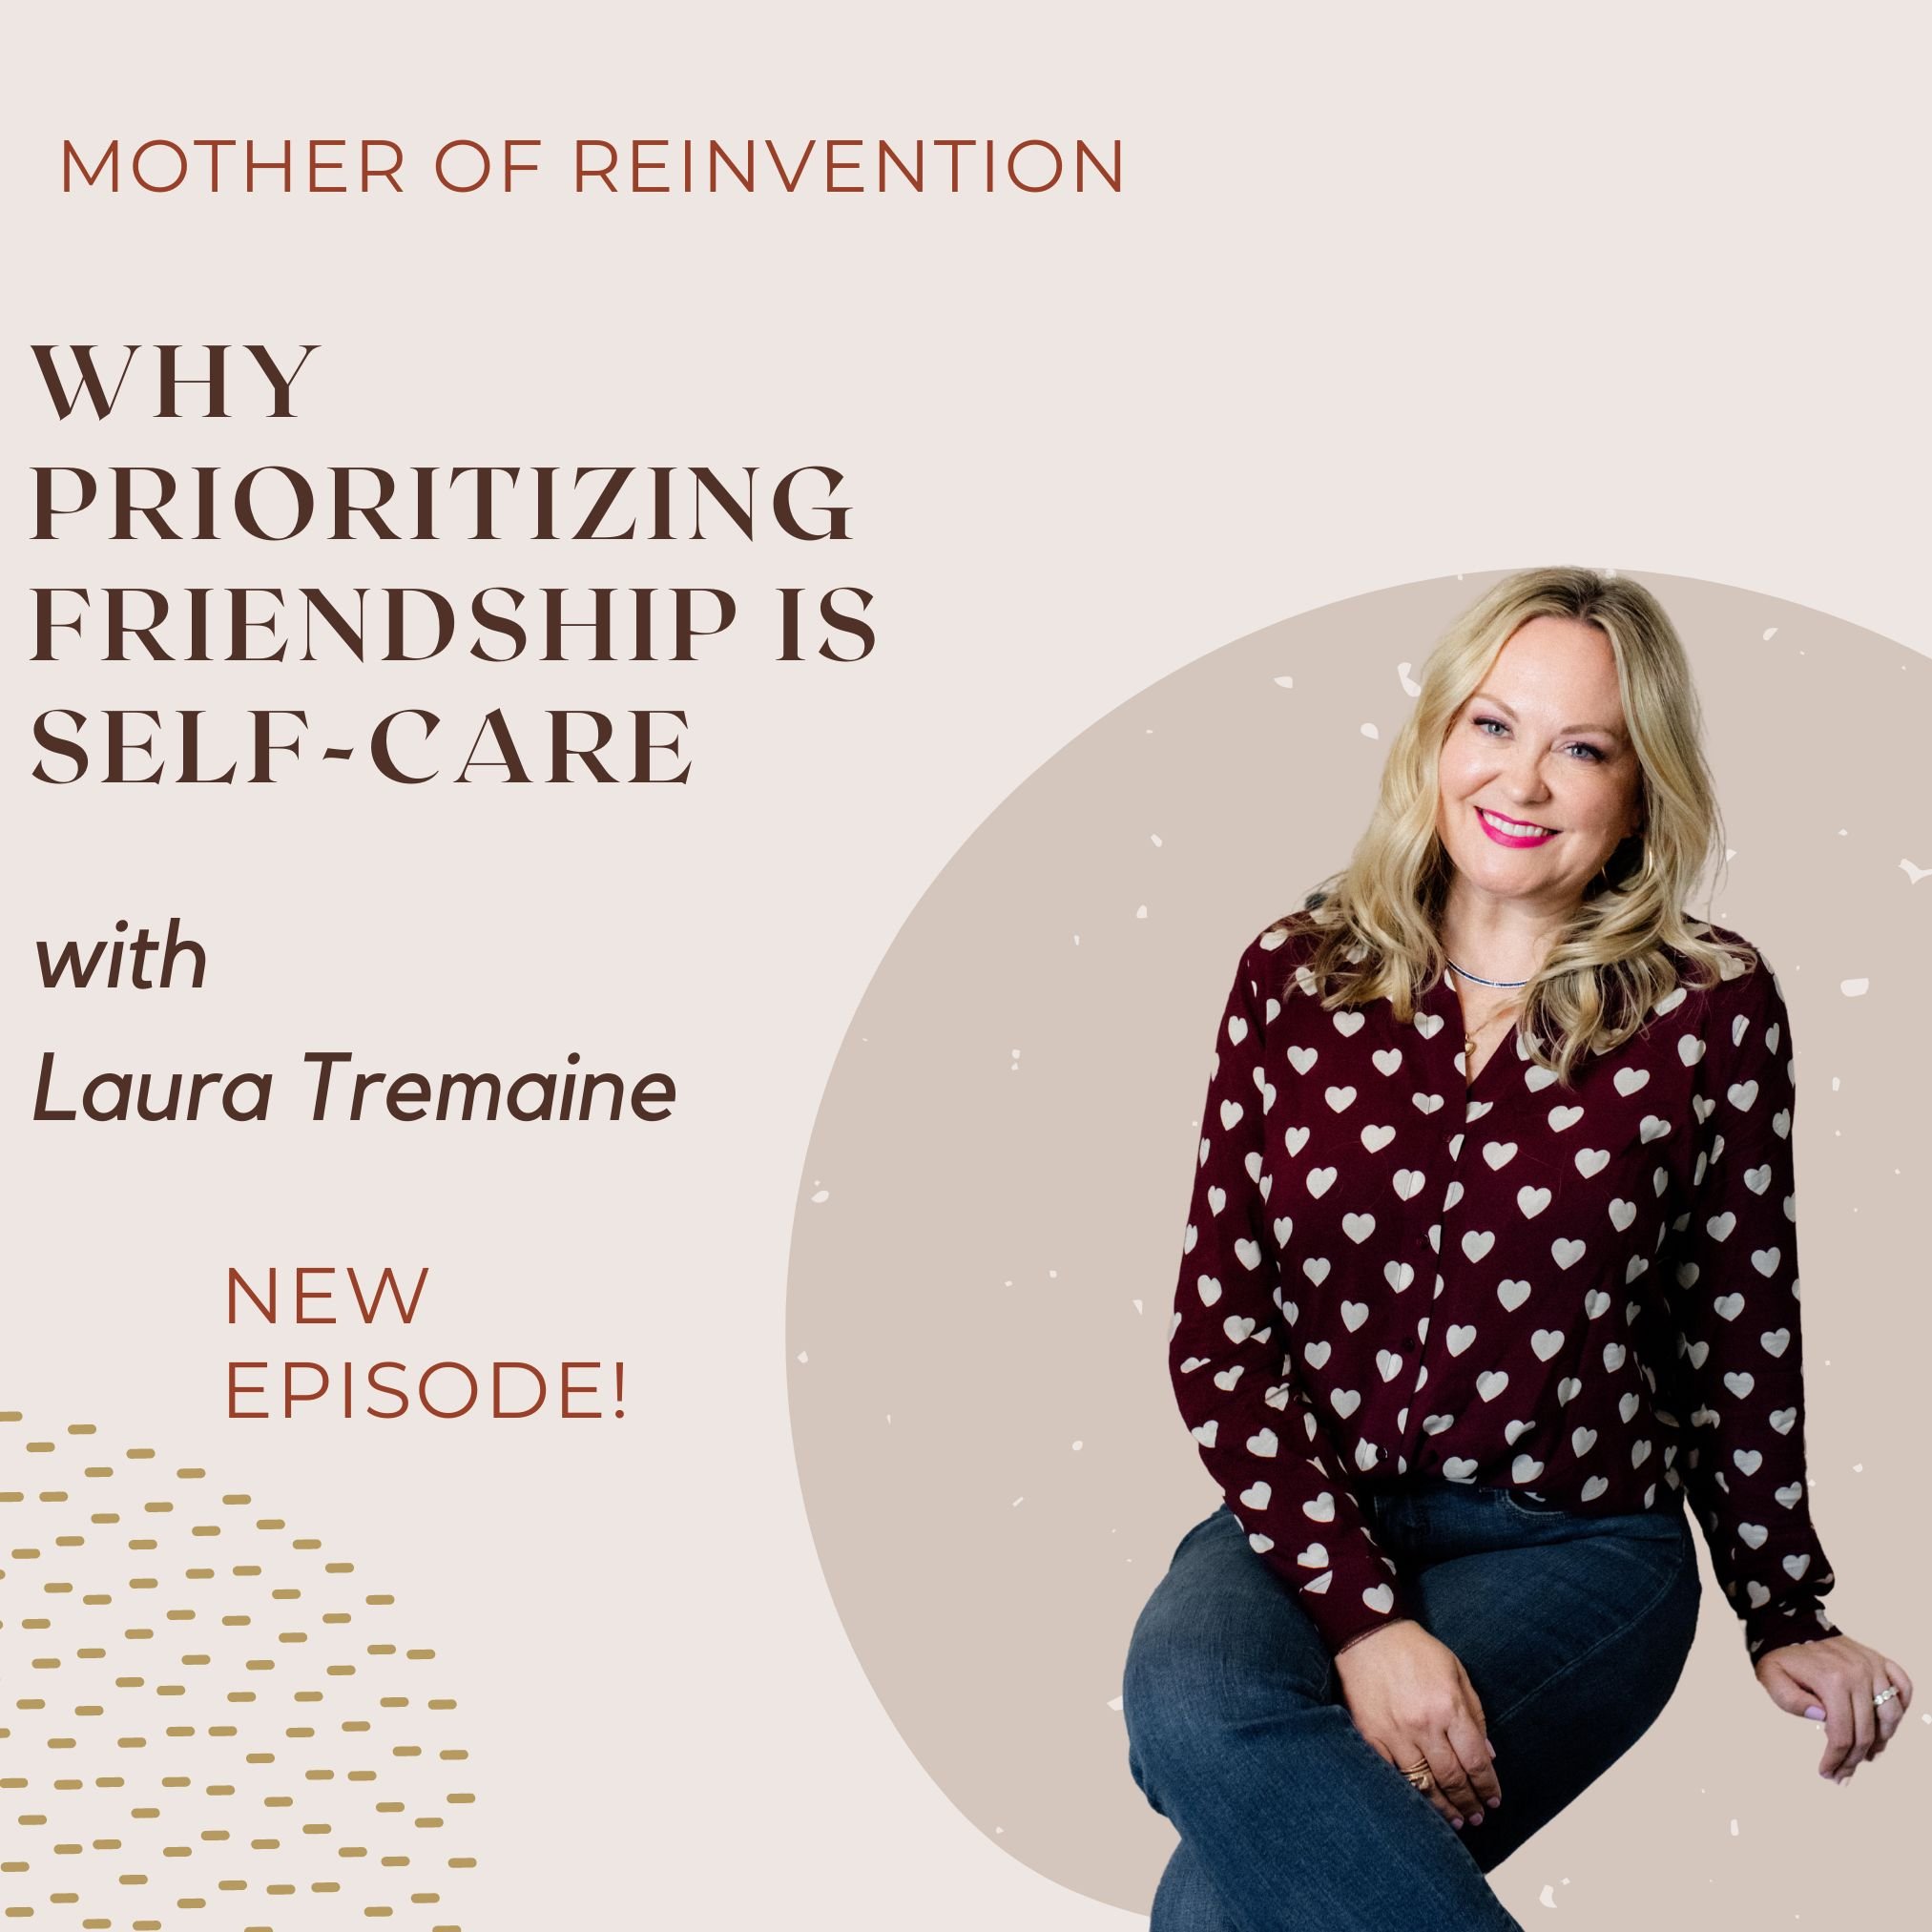 Mother of Reinvention Podcast